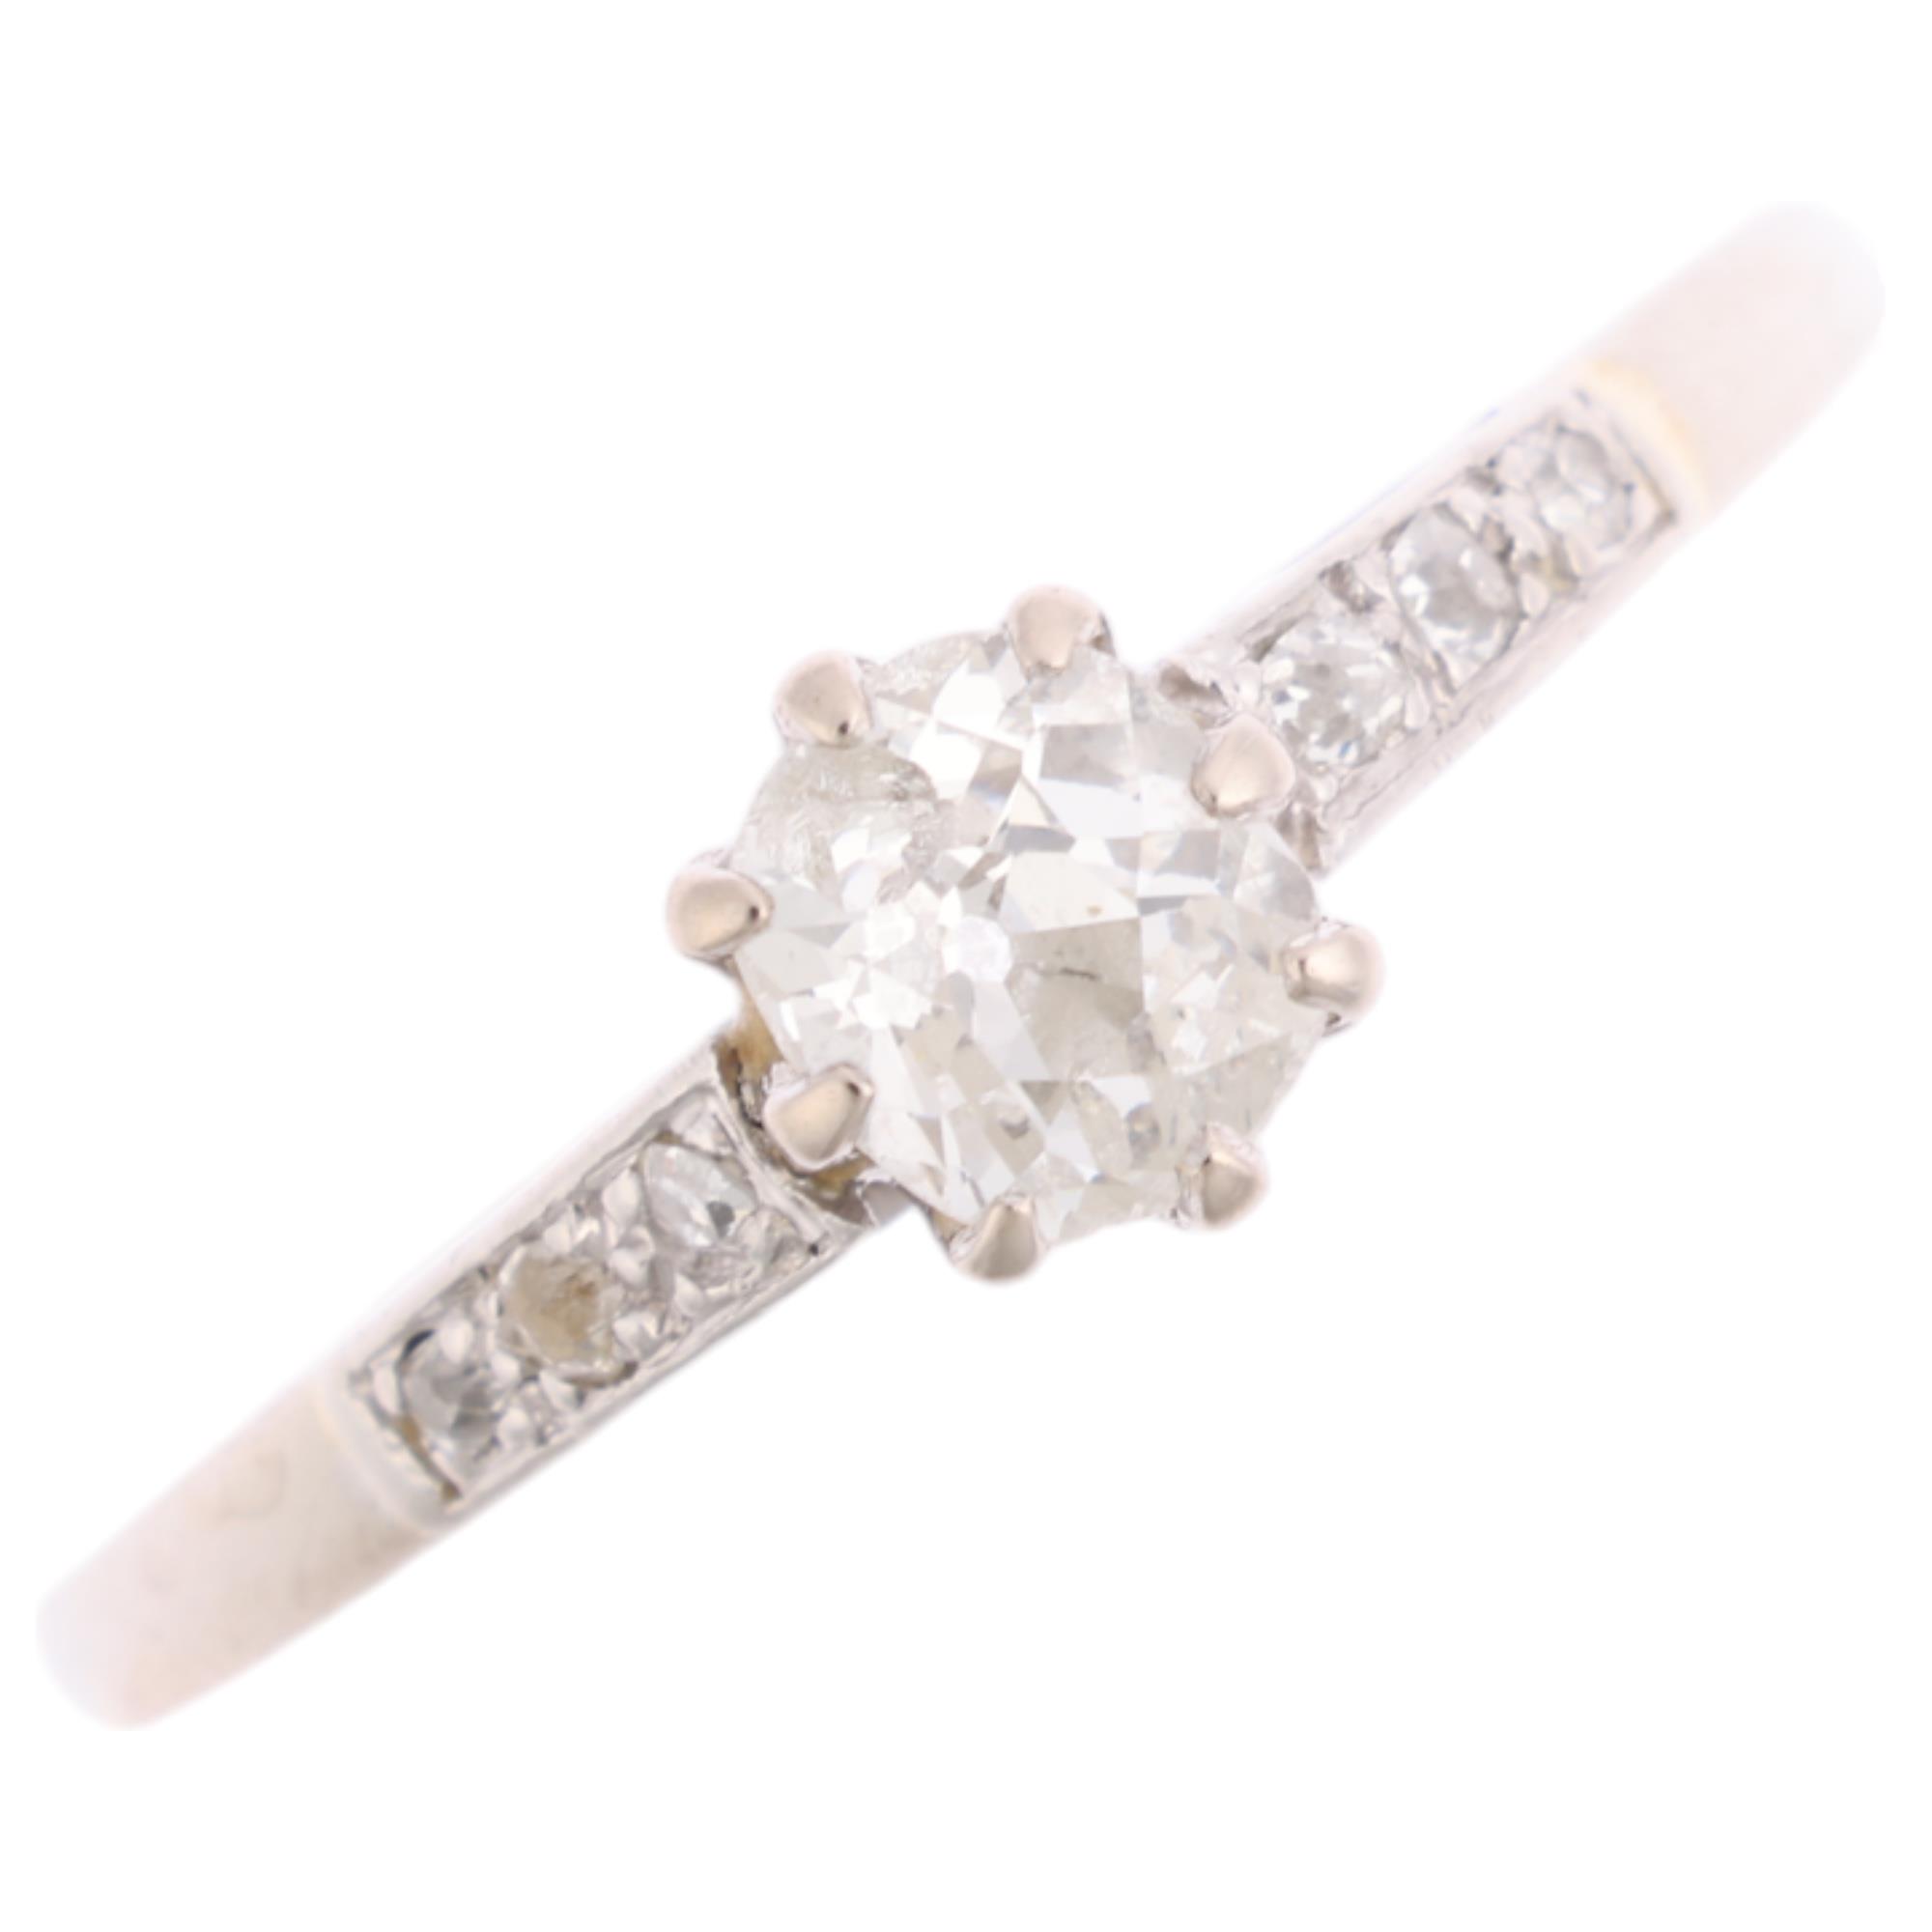 An Art Deco platinum 0.35ct solitaire diamond ring, claw set with old-cut diamond and diamond